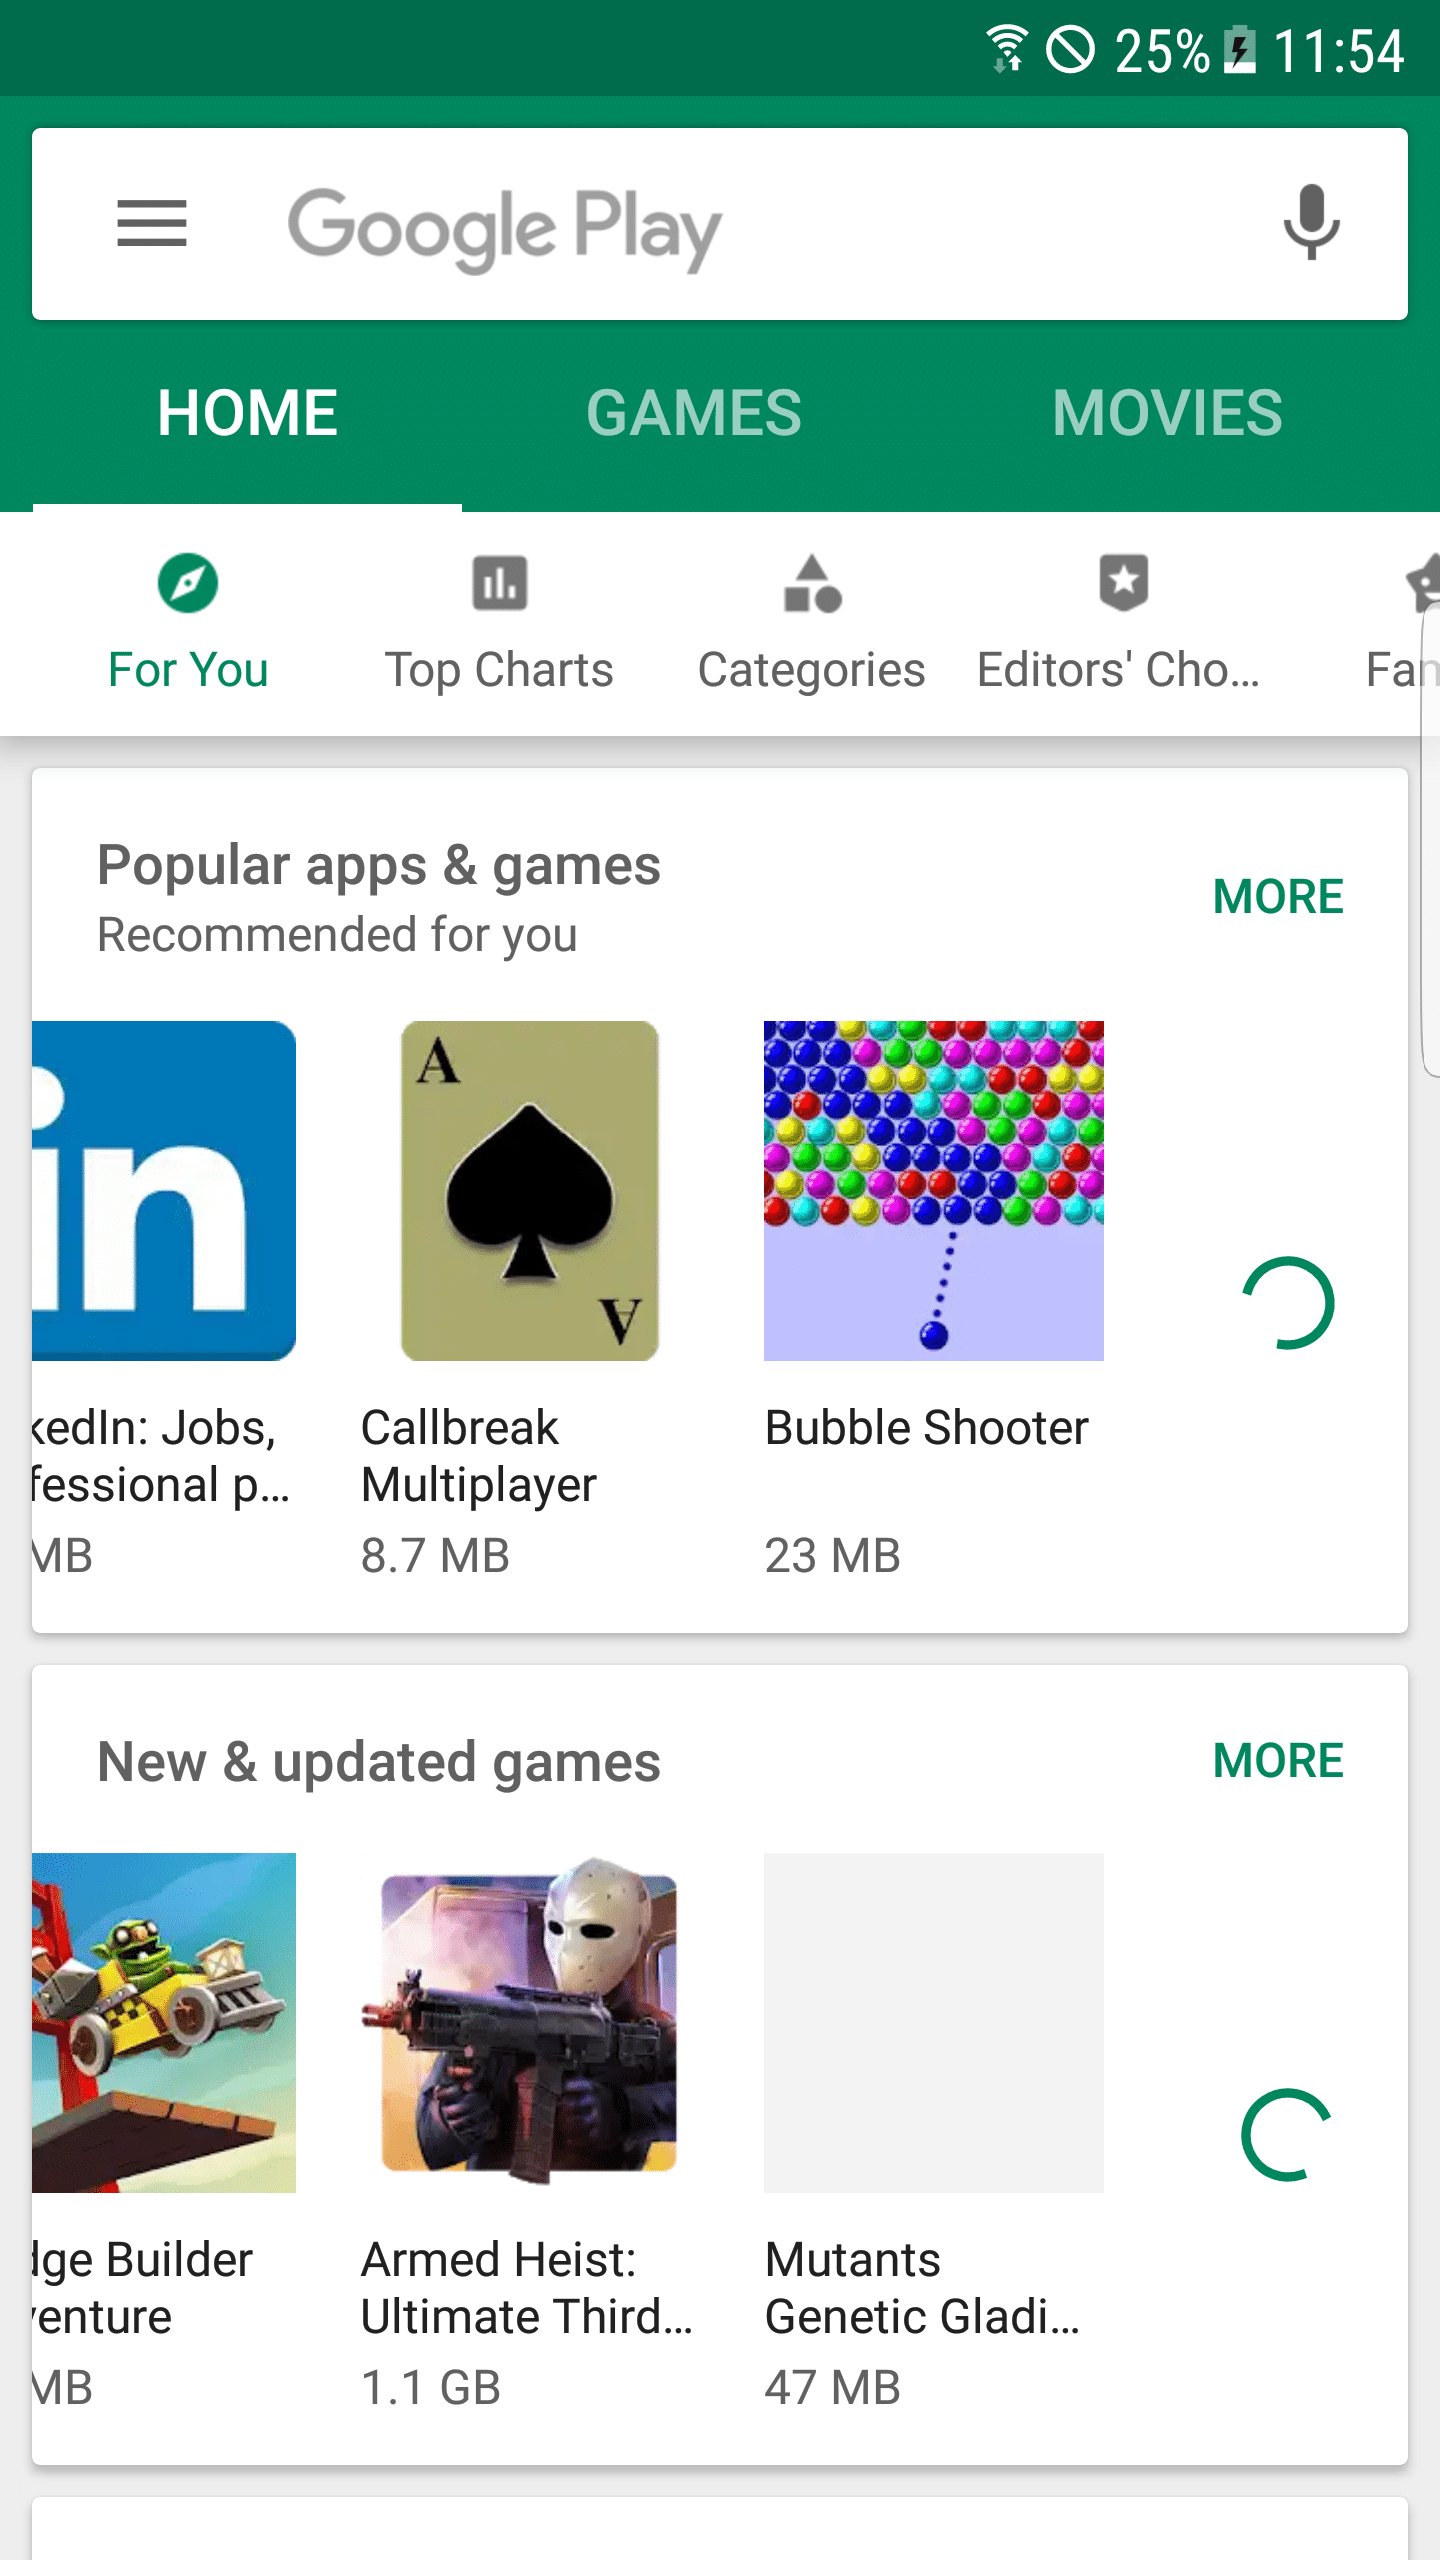 Launch the Google Play app